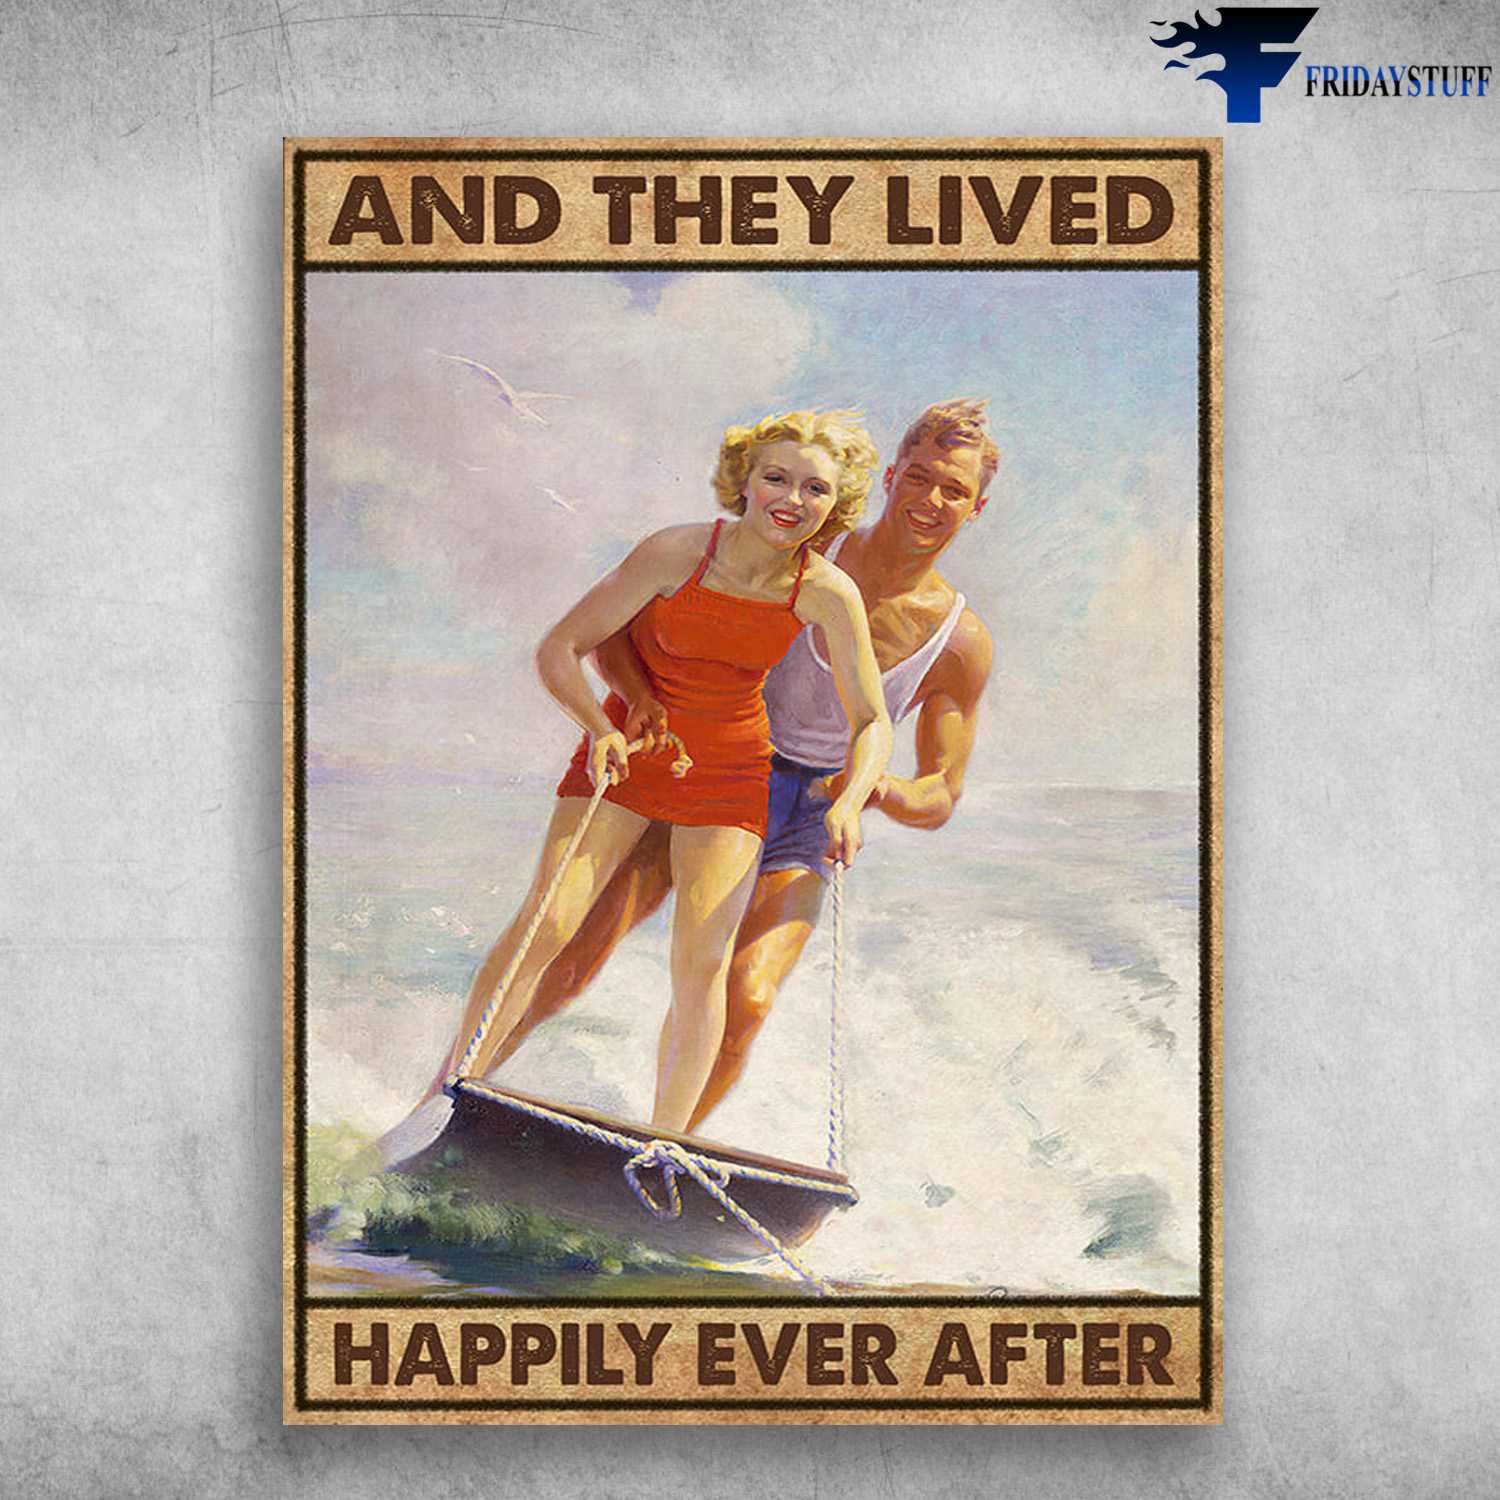 Surfing Couple, And They Lived, Happily Ever After, Love Couple